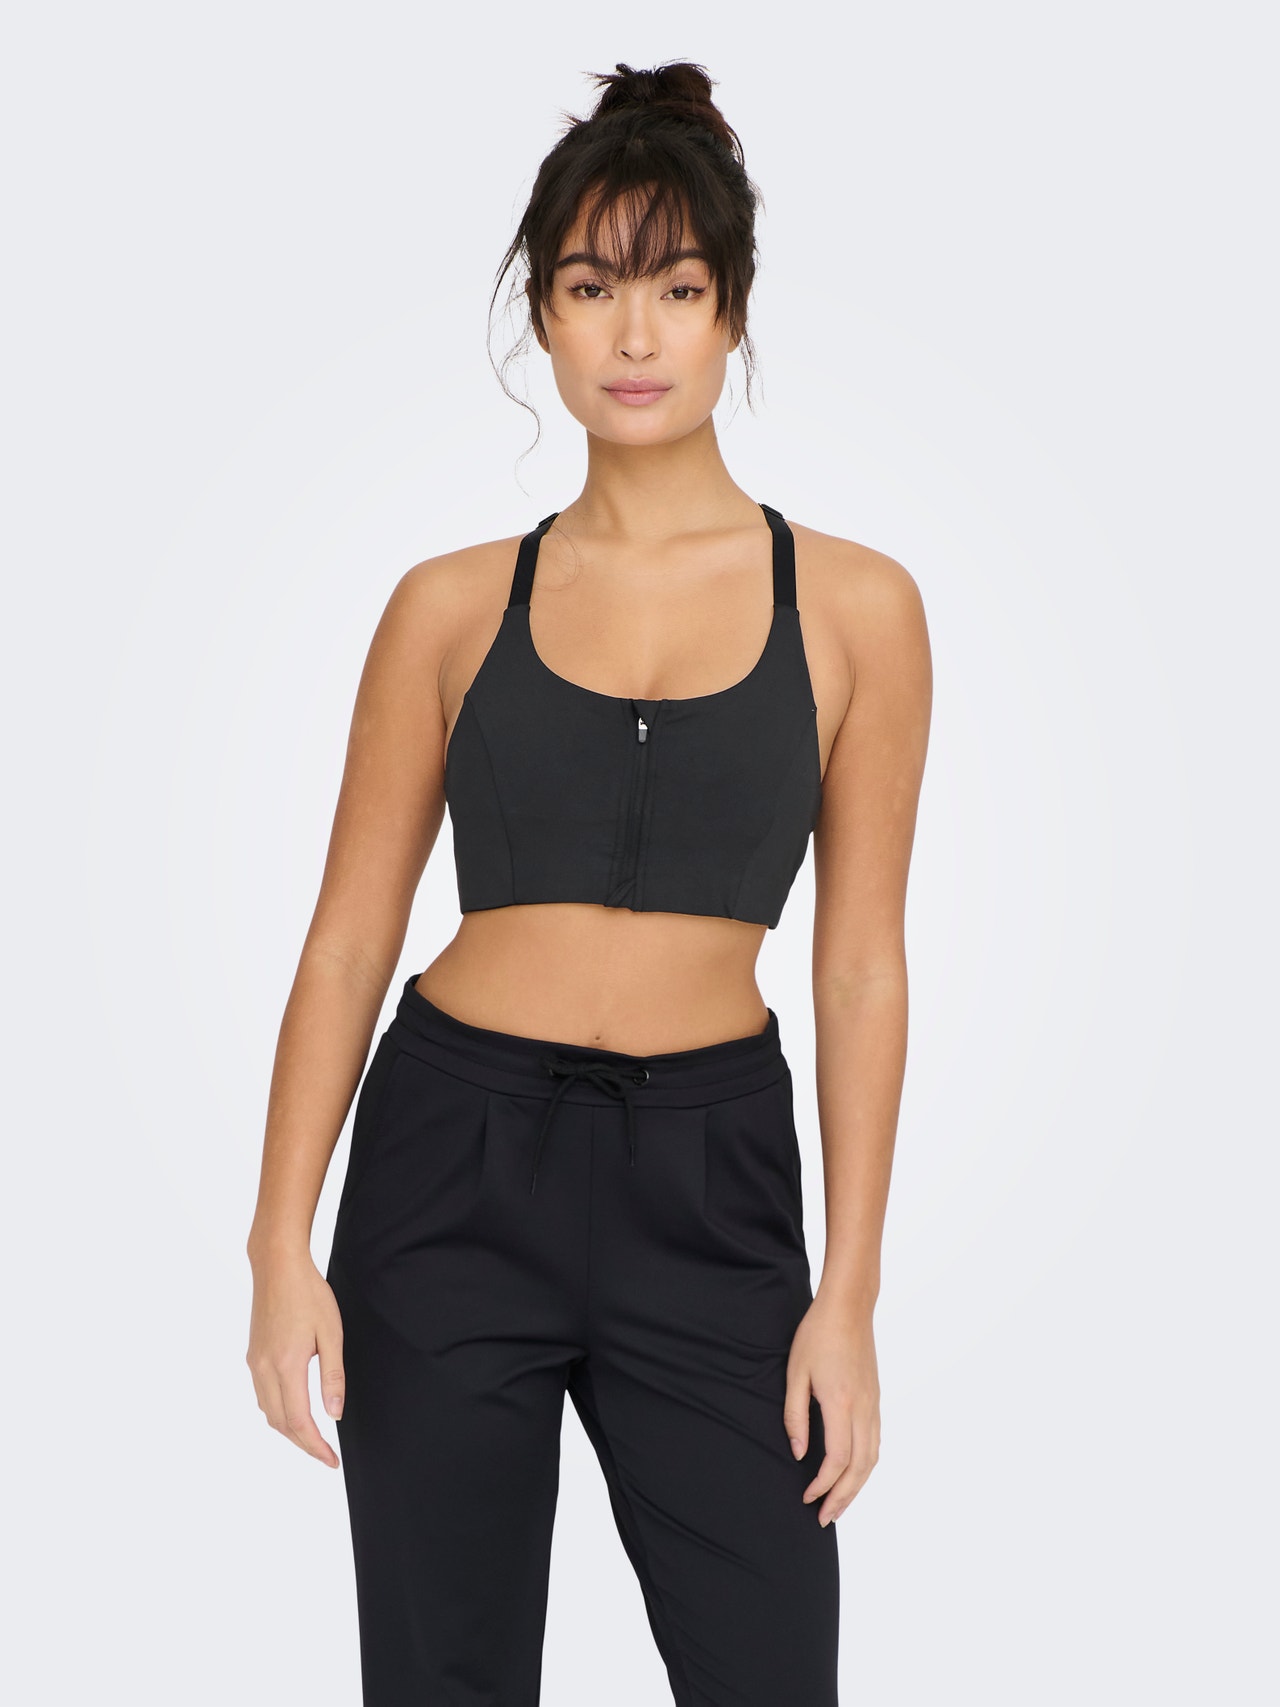 Adjustable Sports bra with High Support with 15% discount!